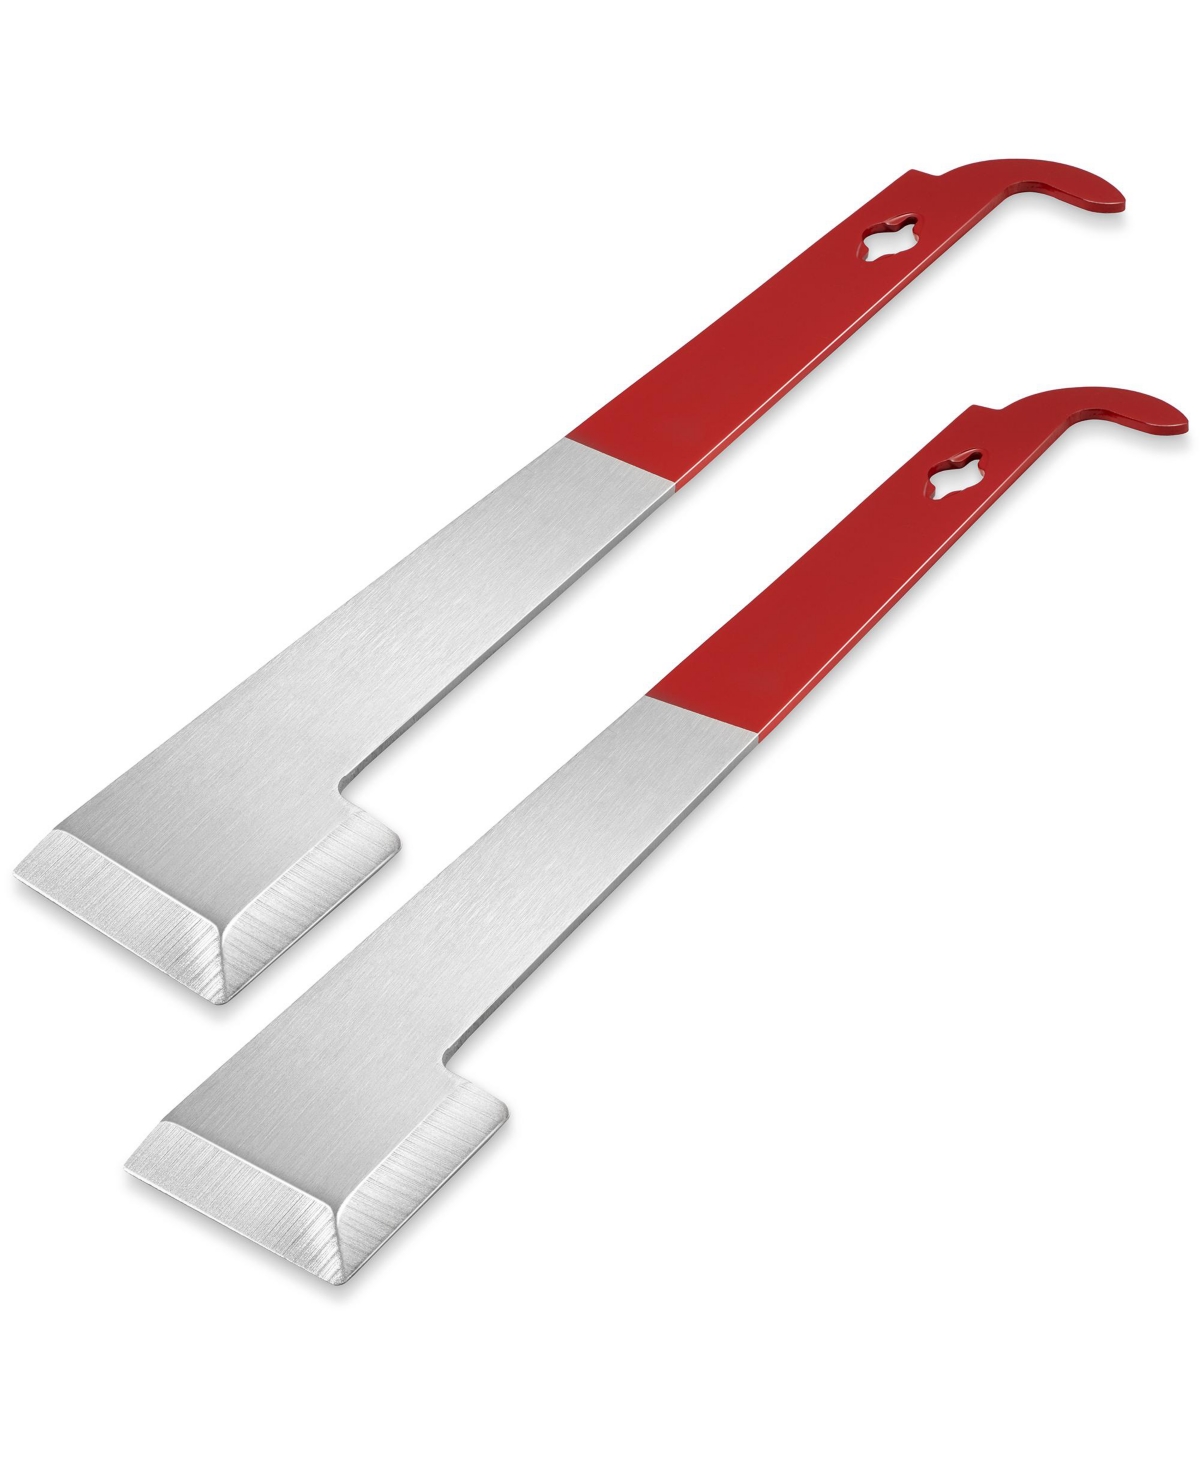 2-Pack Stainless Steel J Hook Bee Hive Tool, 10-1/2 inch Frame Lifter and Scraper, Beekeeping Equipment - Red